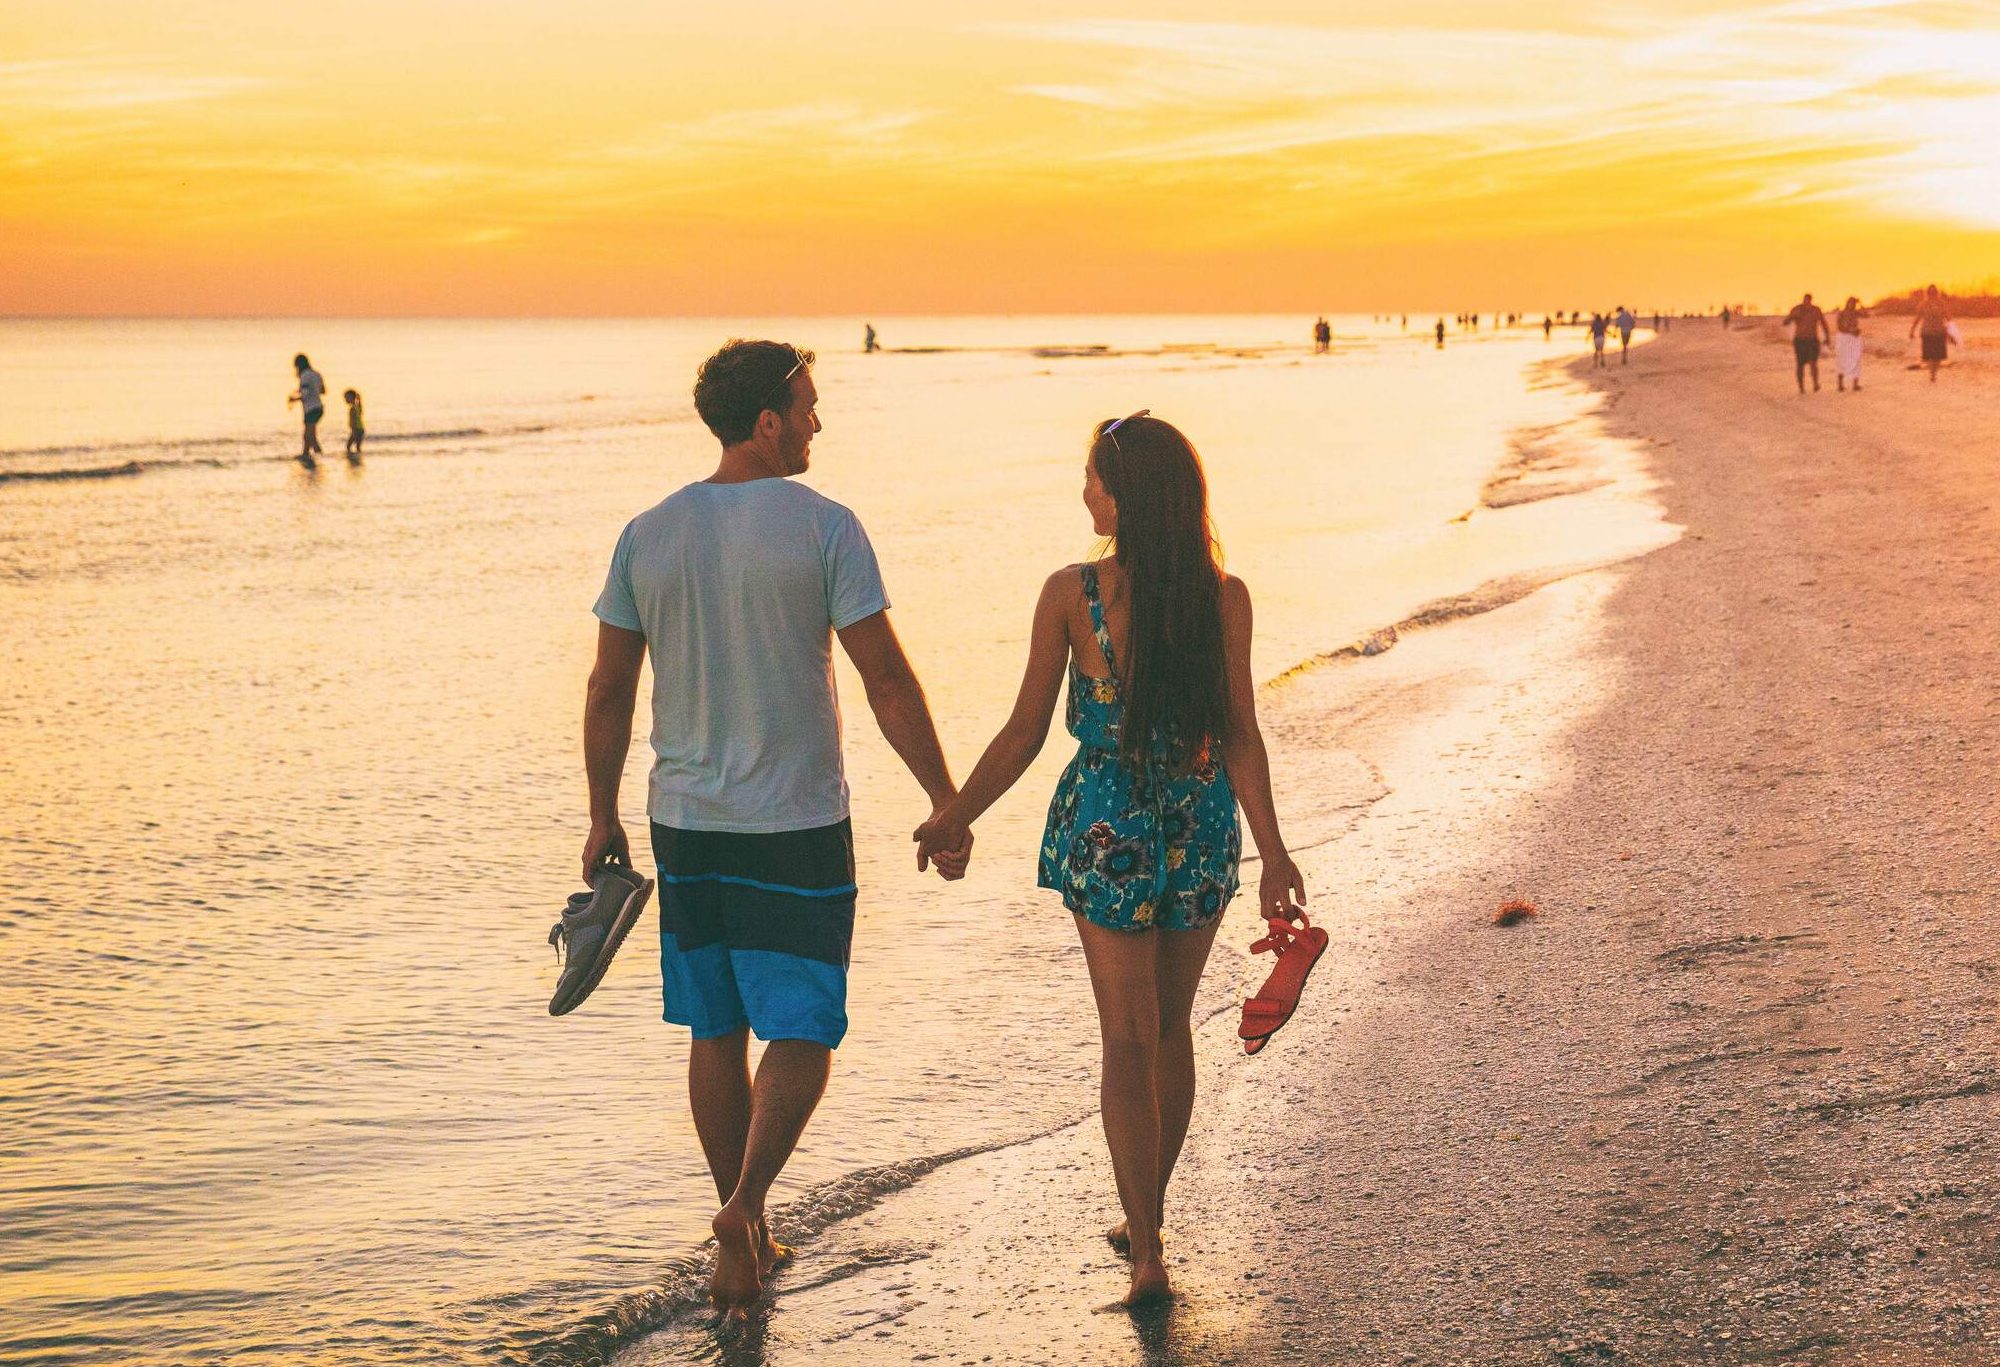 A couple going on a sunset stroll by the beach barefooted.